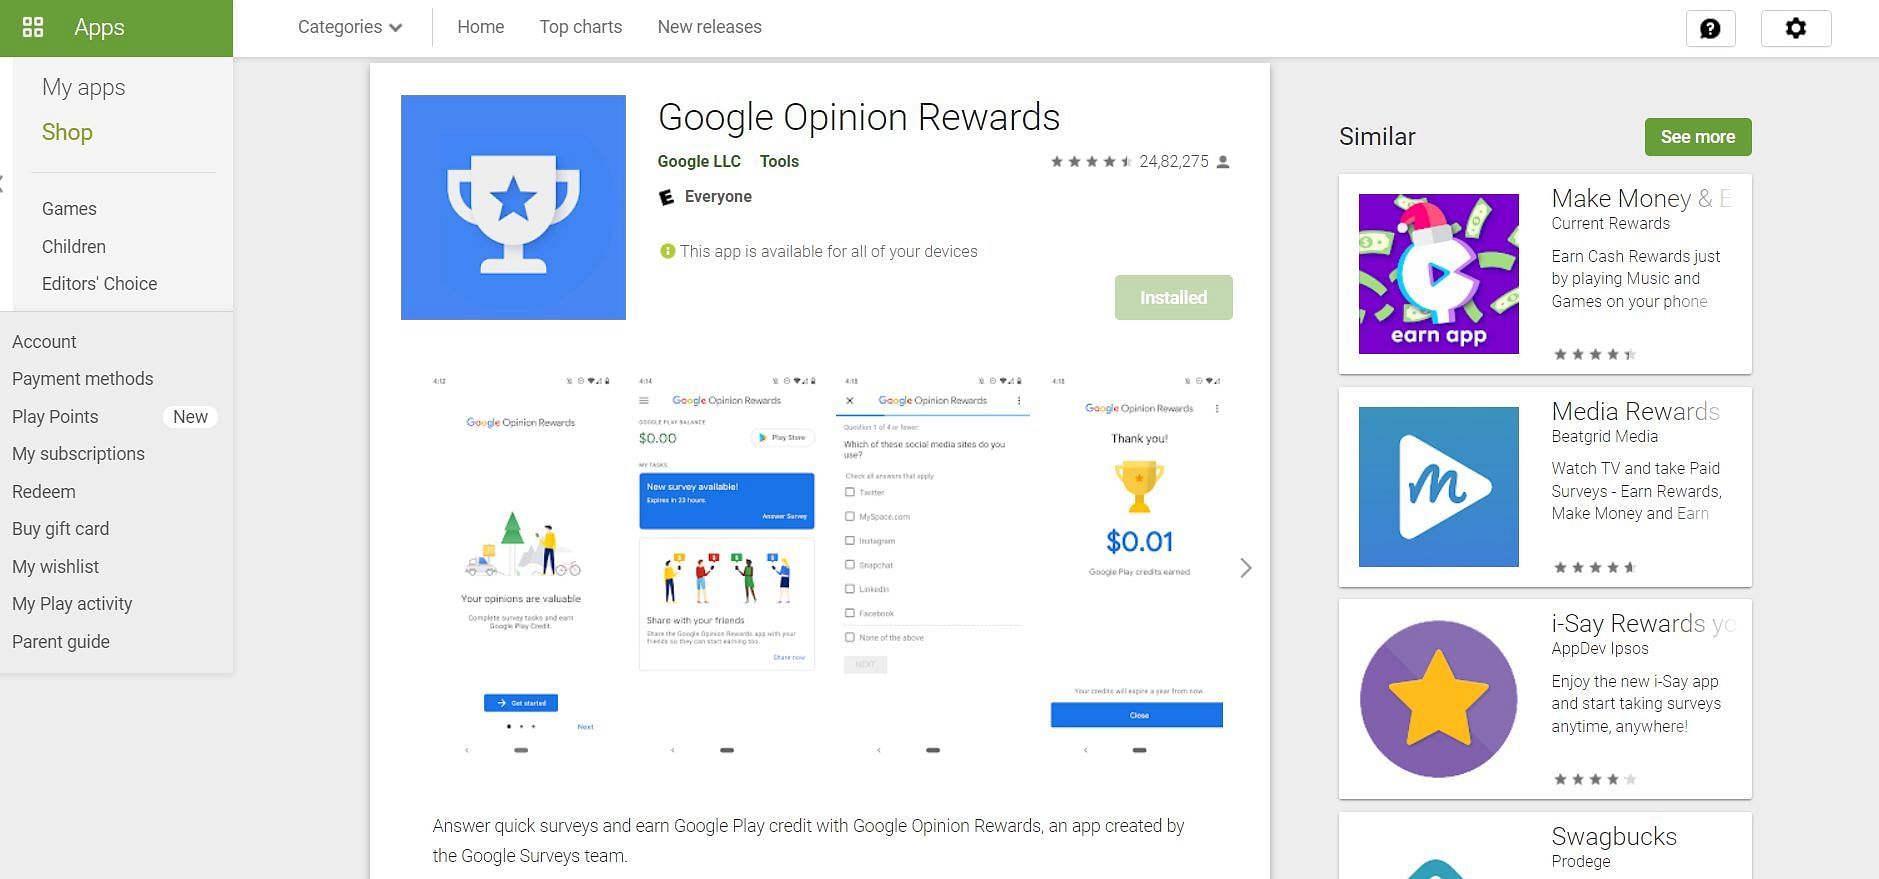 Google Opinion Rewards allows users to earn money by participating in surveys (Image via Google Play)